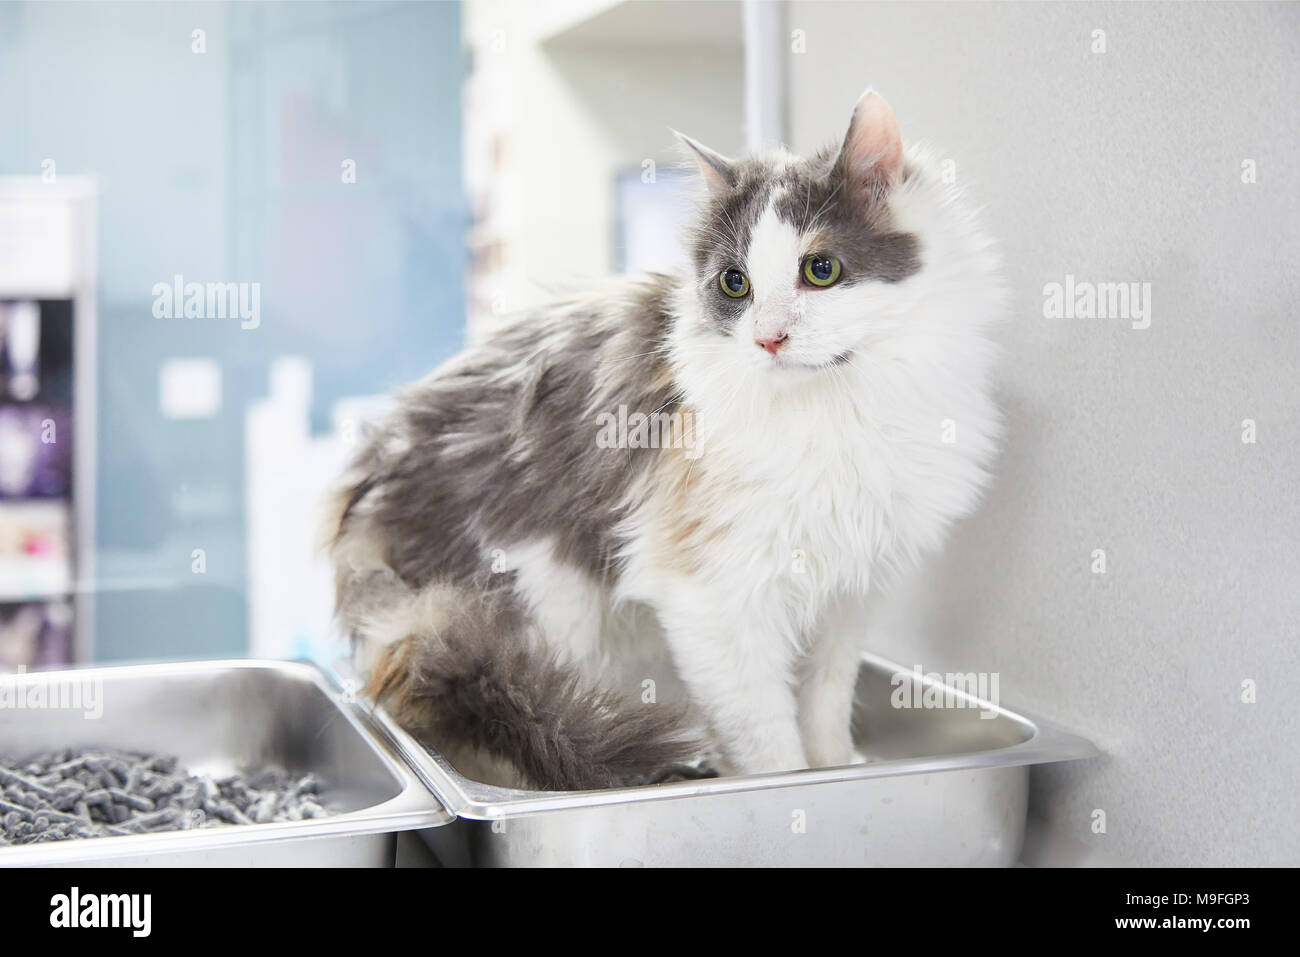 Domestic long-haired calico cat sitting in a litter box Stock Photo